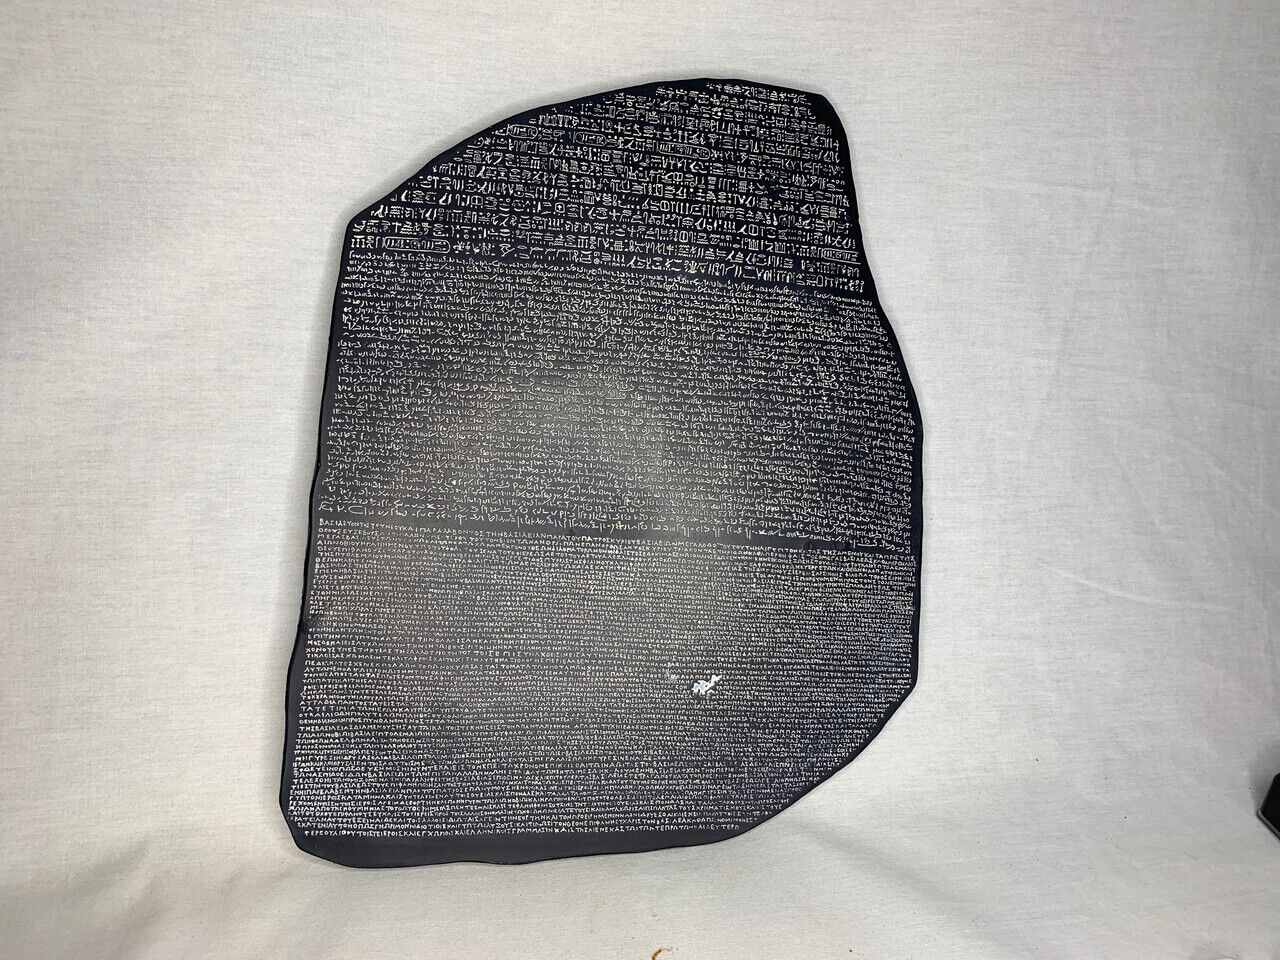 Rosetta Stone, Detailed, Signed, Numbered, Limited Edition, With Free Color Book